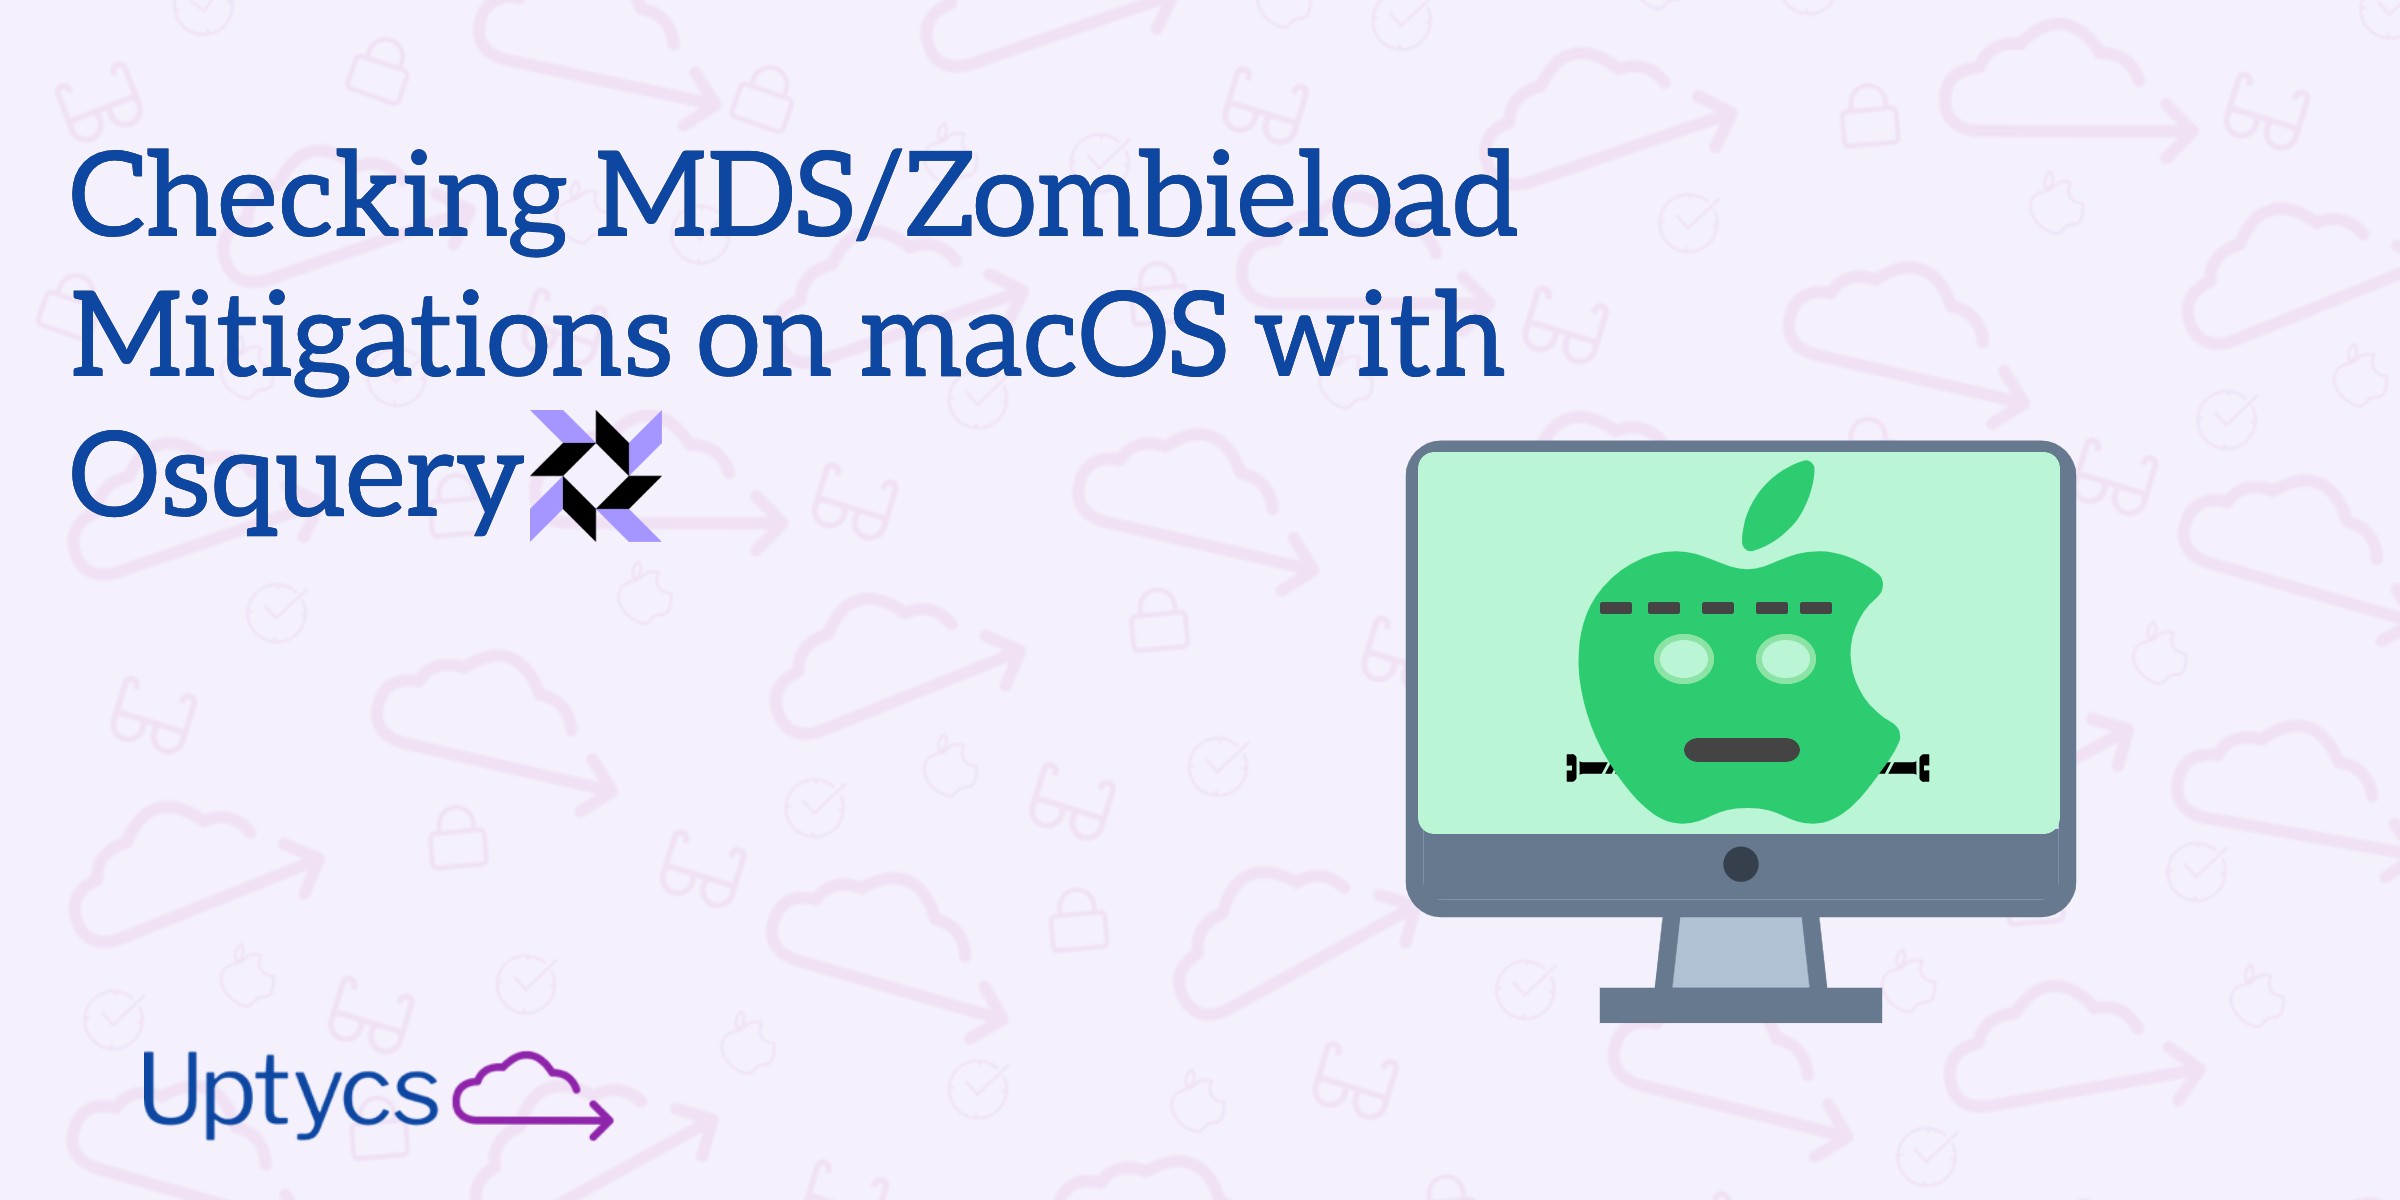 Checking MDS-Zombieload Mitigations on macOS with Osquery (1)